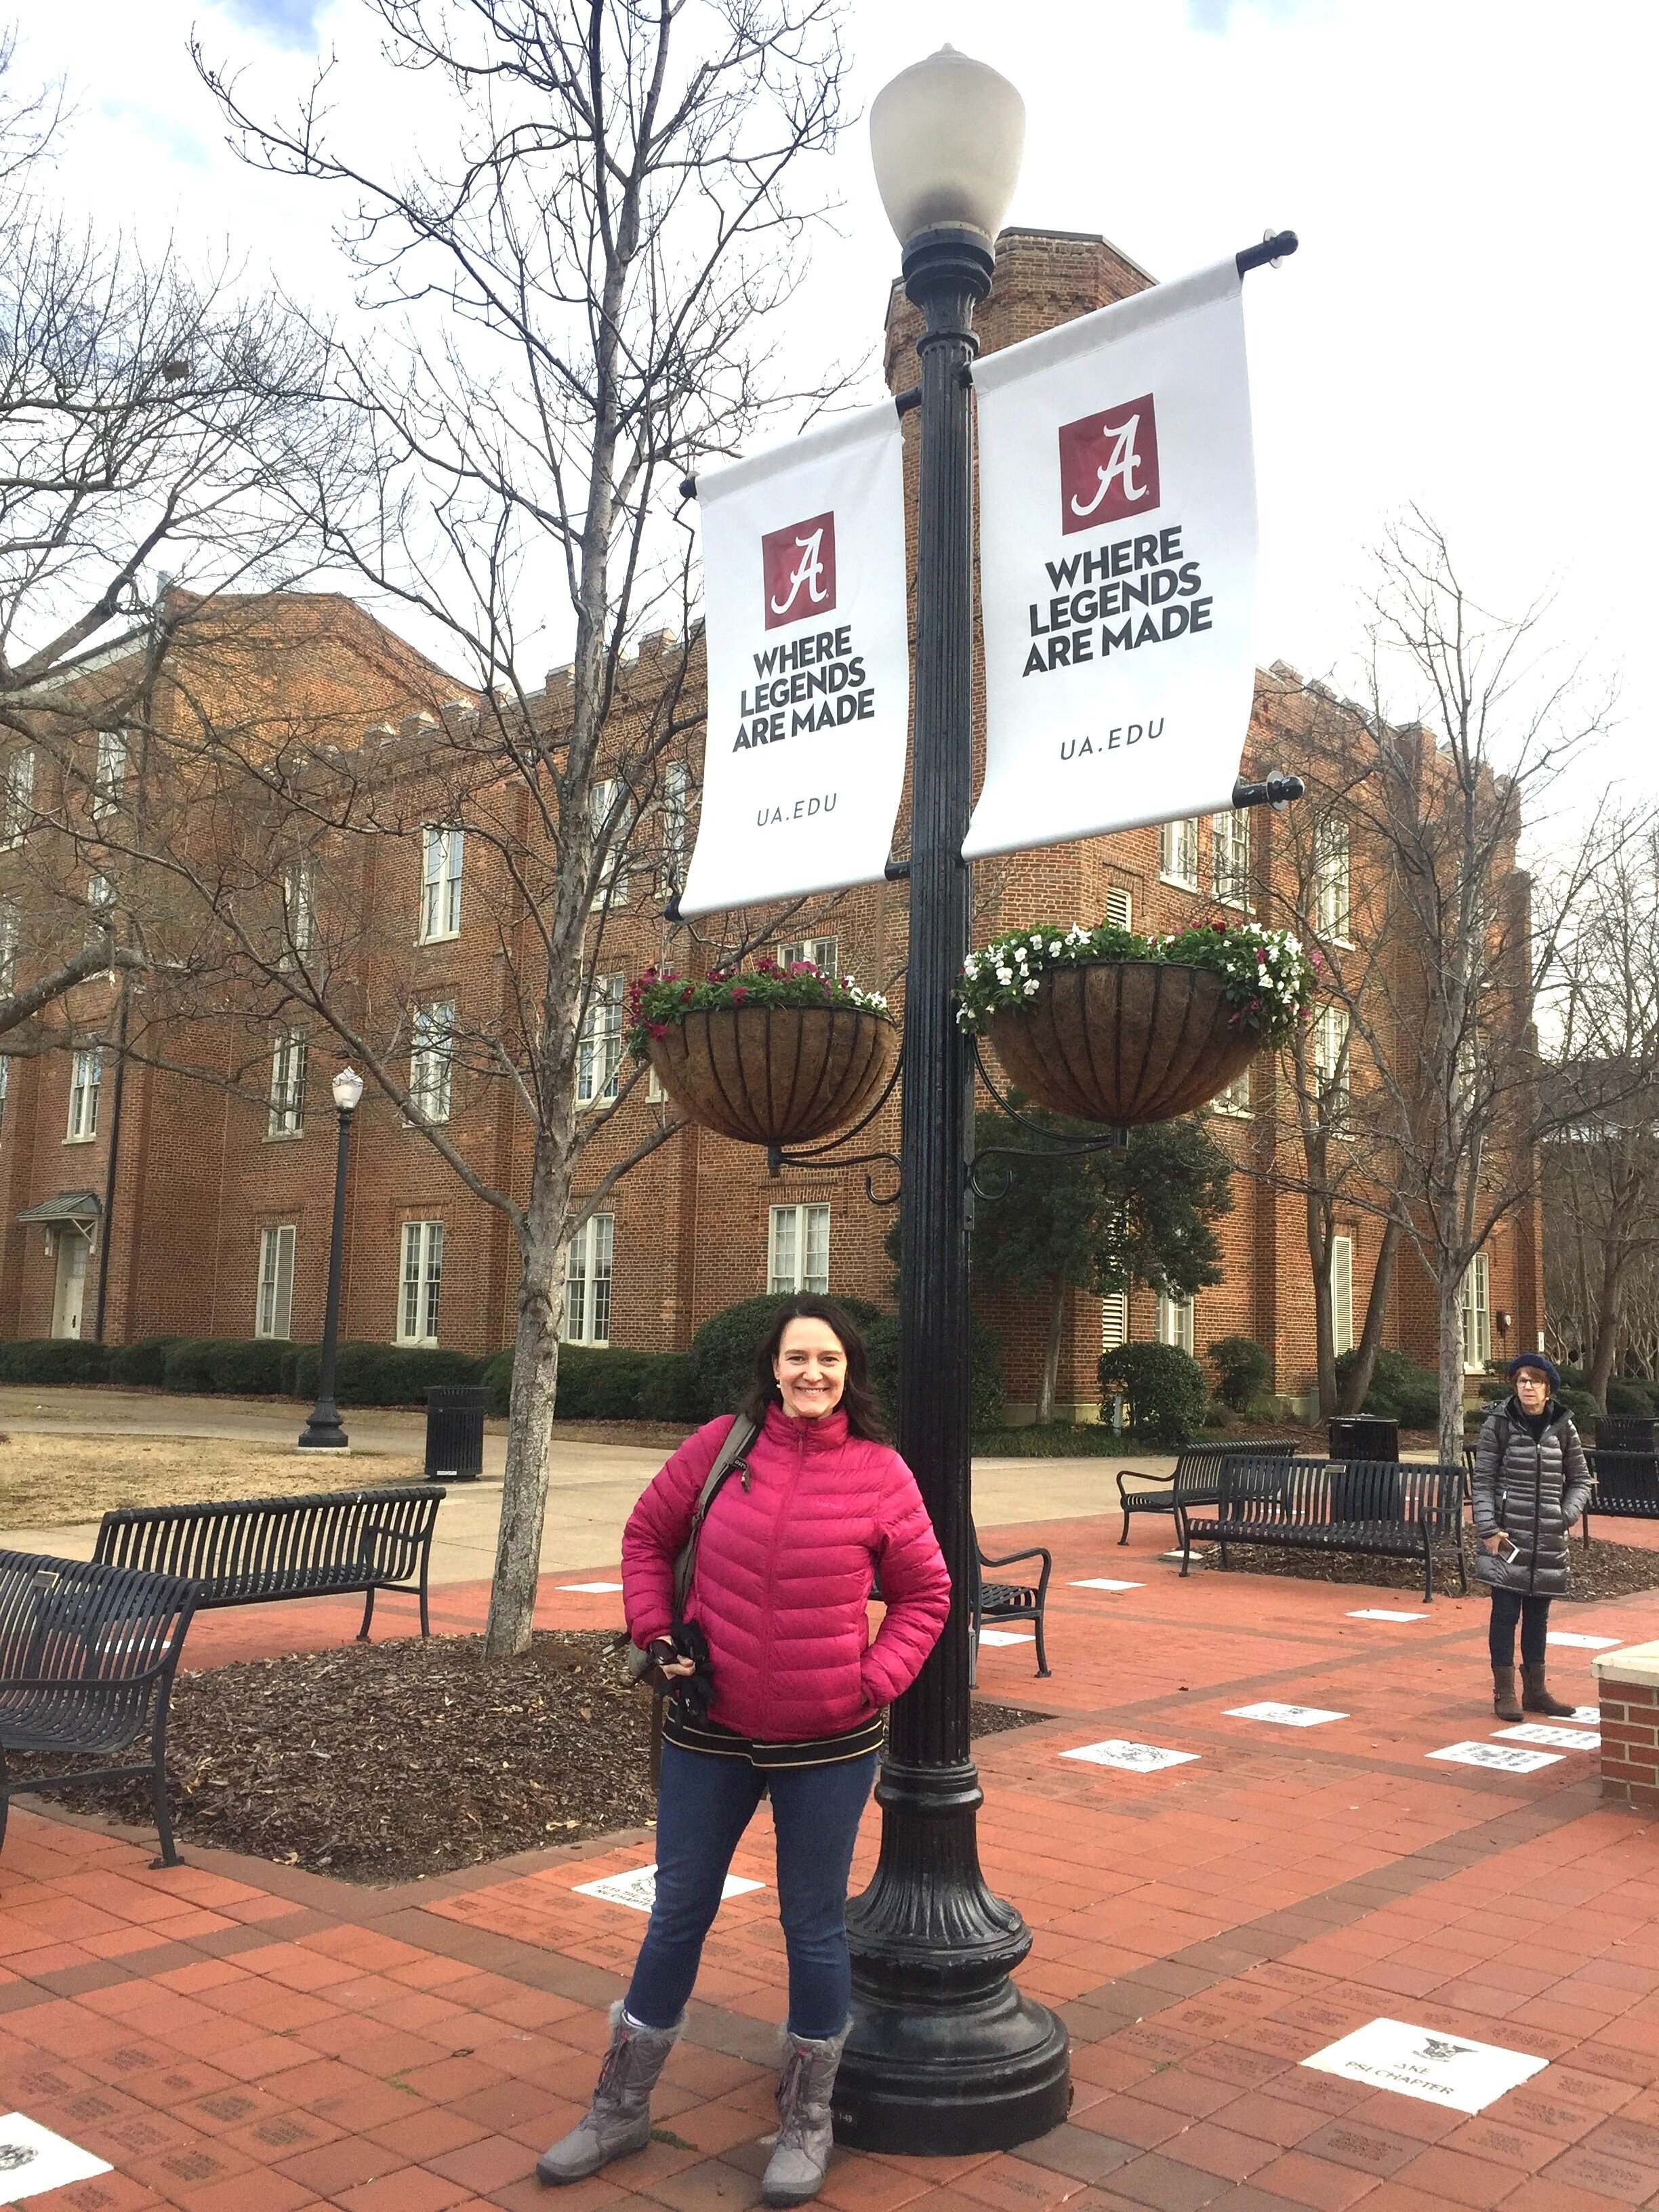 Yes, it snowed when I visited University of Alabama.  Roll Tide!